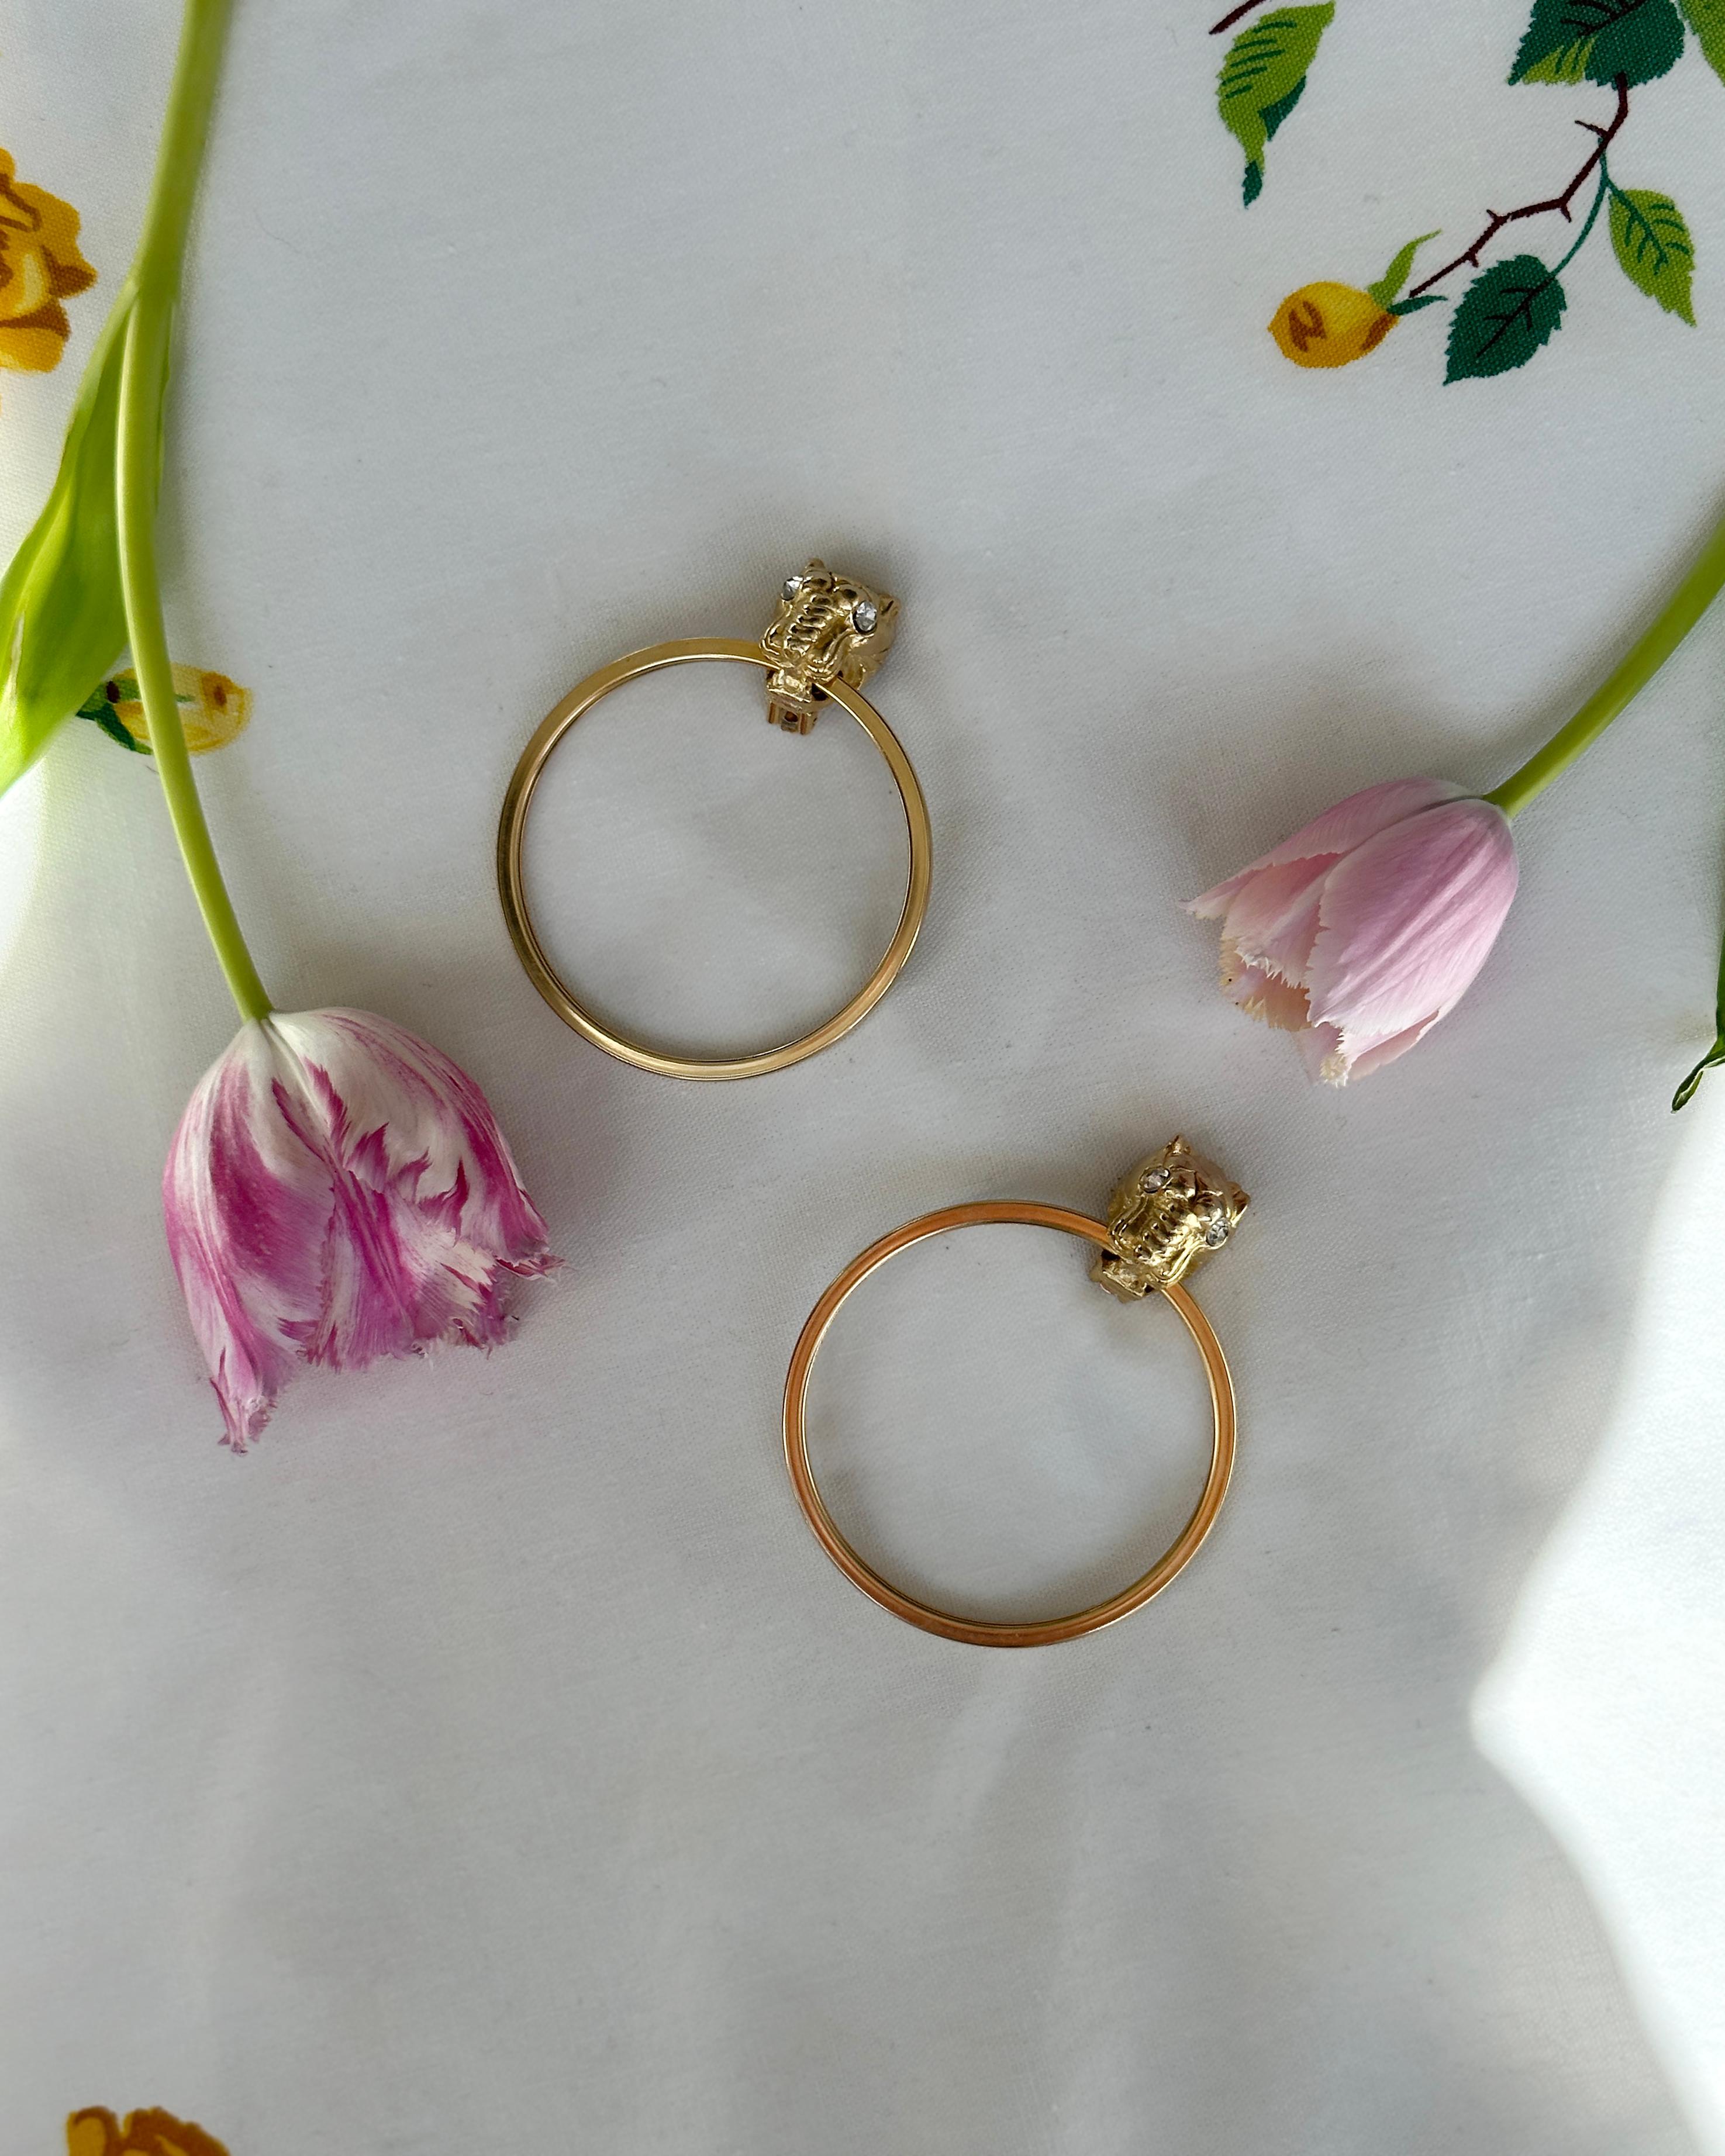 Contemporary Vintage Large Gold Panther Hoop Earrings, attributed to Givenchy